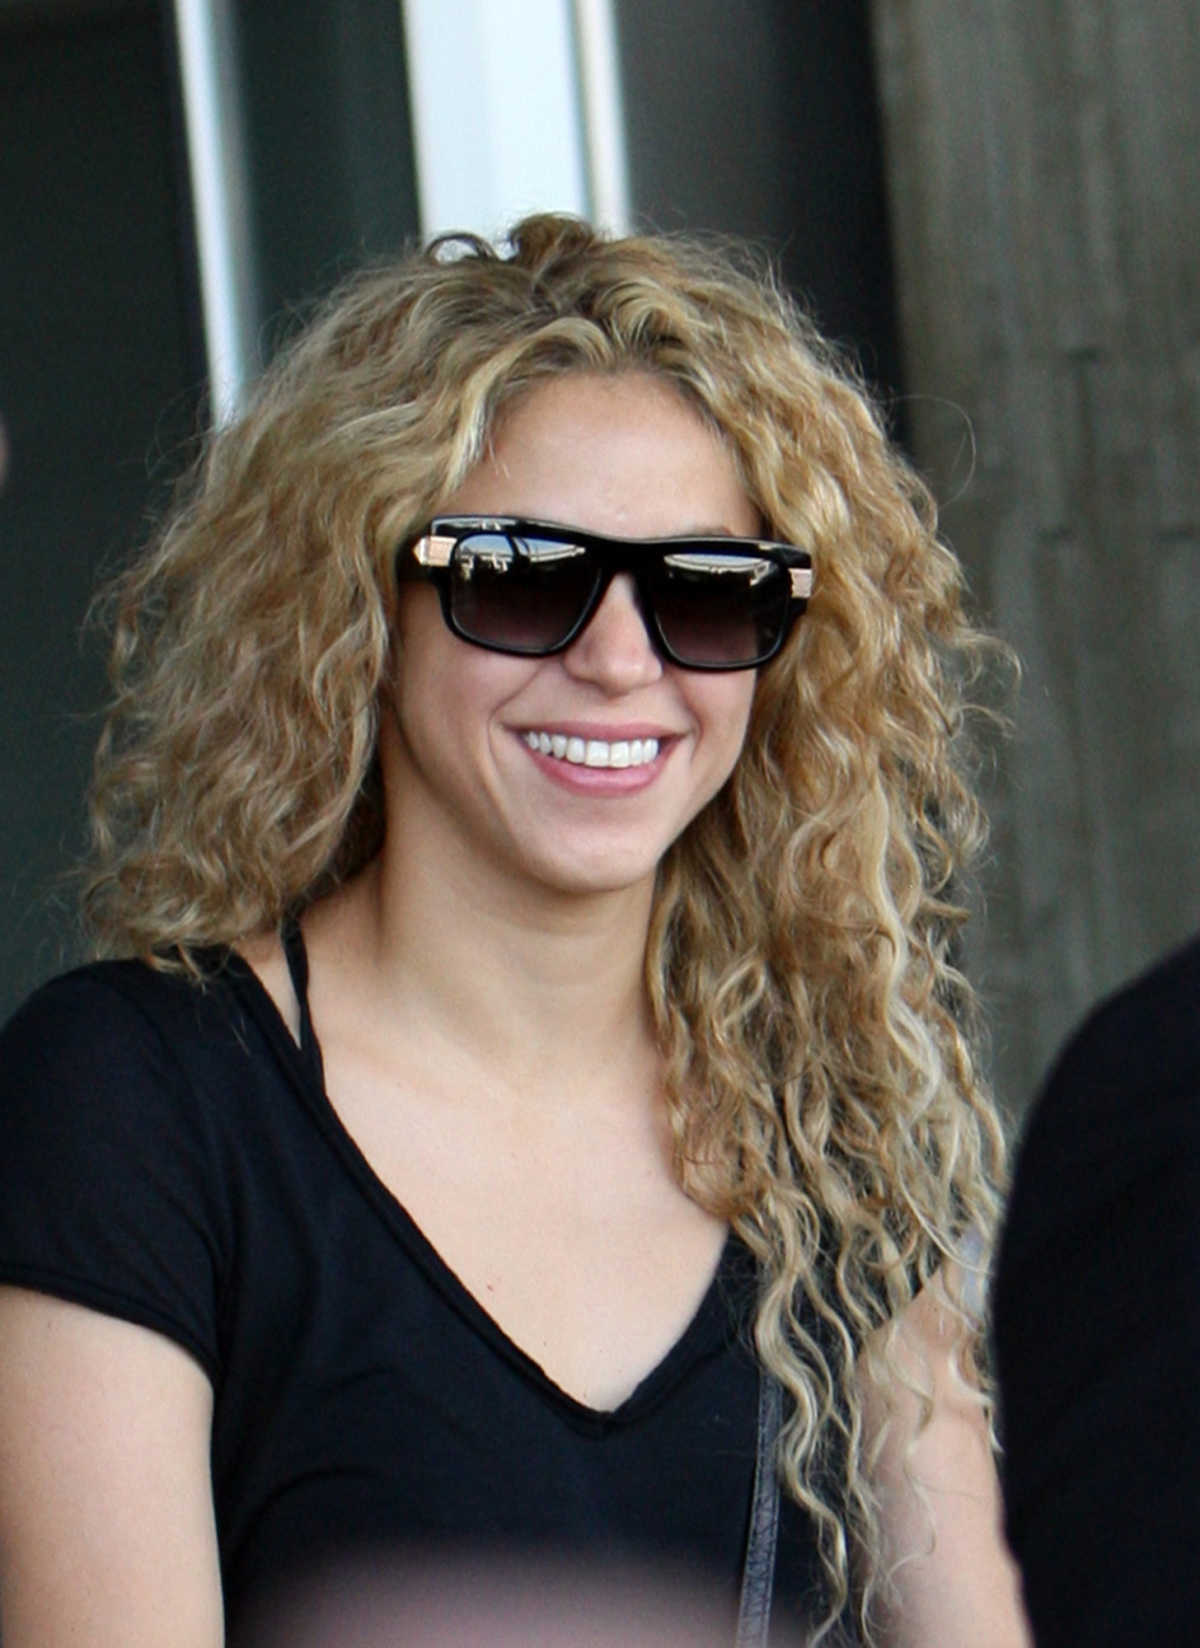 Shakira decided to show off her natural curls in this look from 2013.